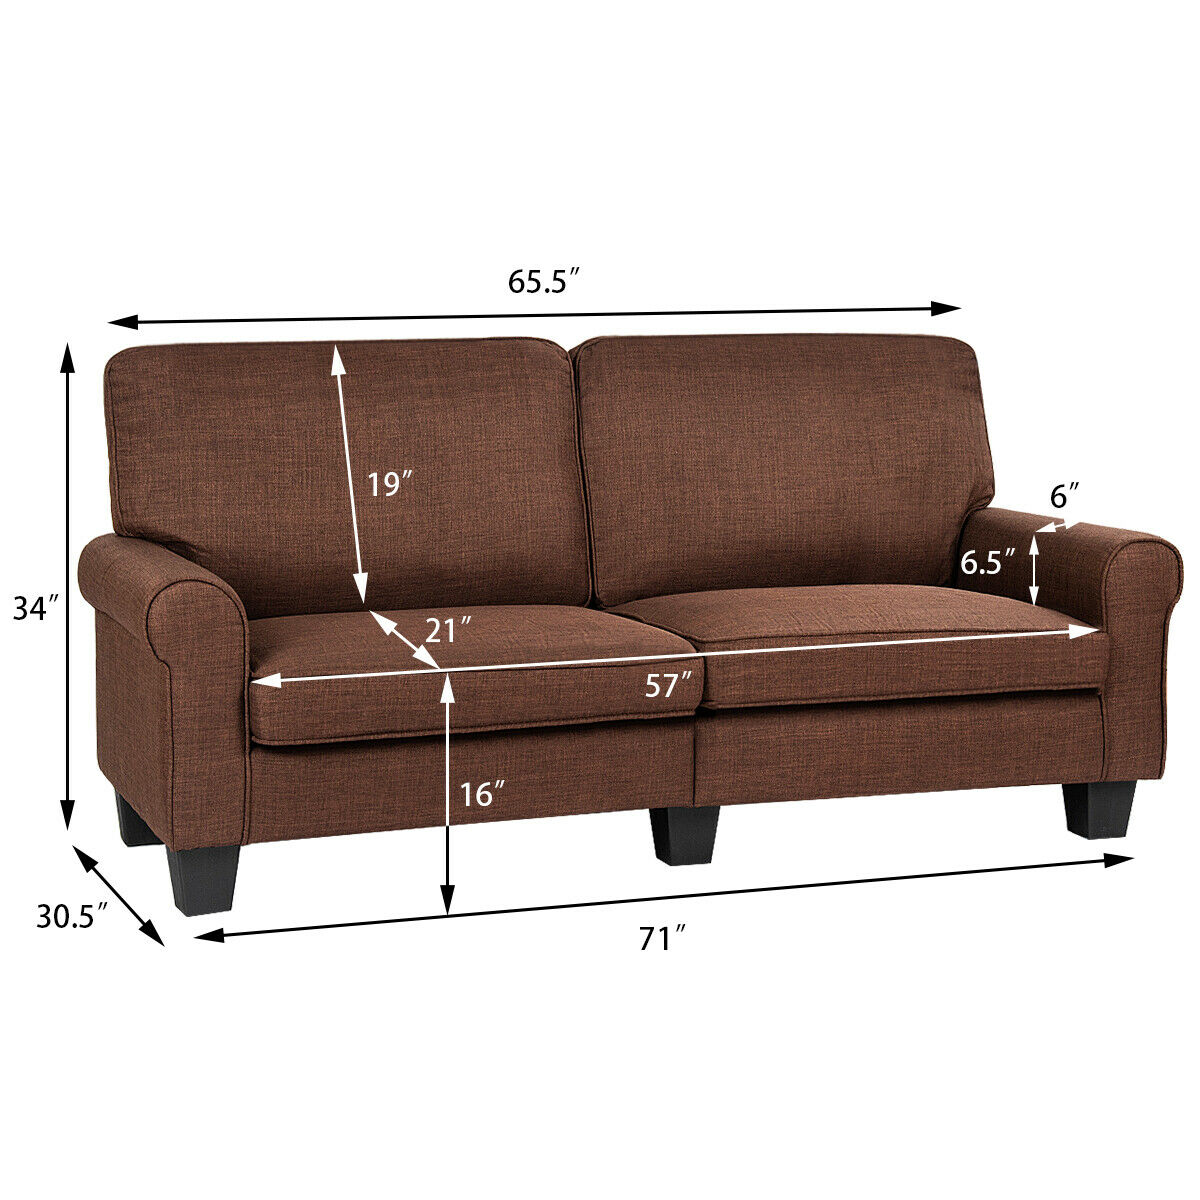 Gymax Sofa Couch Loveseat Fabric Upholstered Curved Armrest Home Living Room Furniture - image 2 of 10